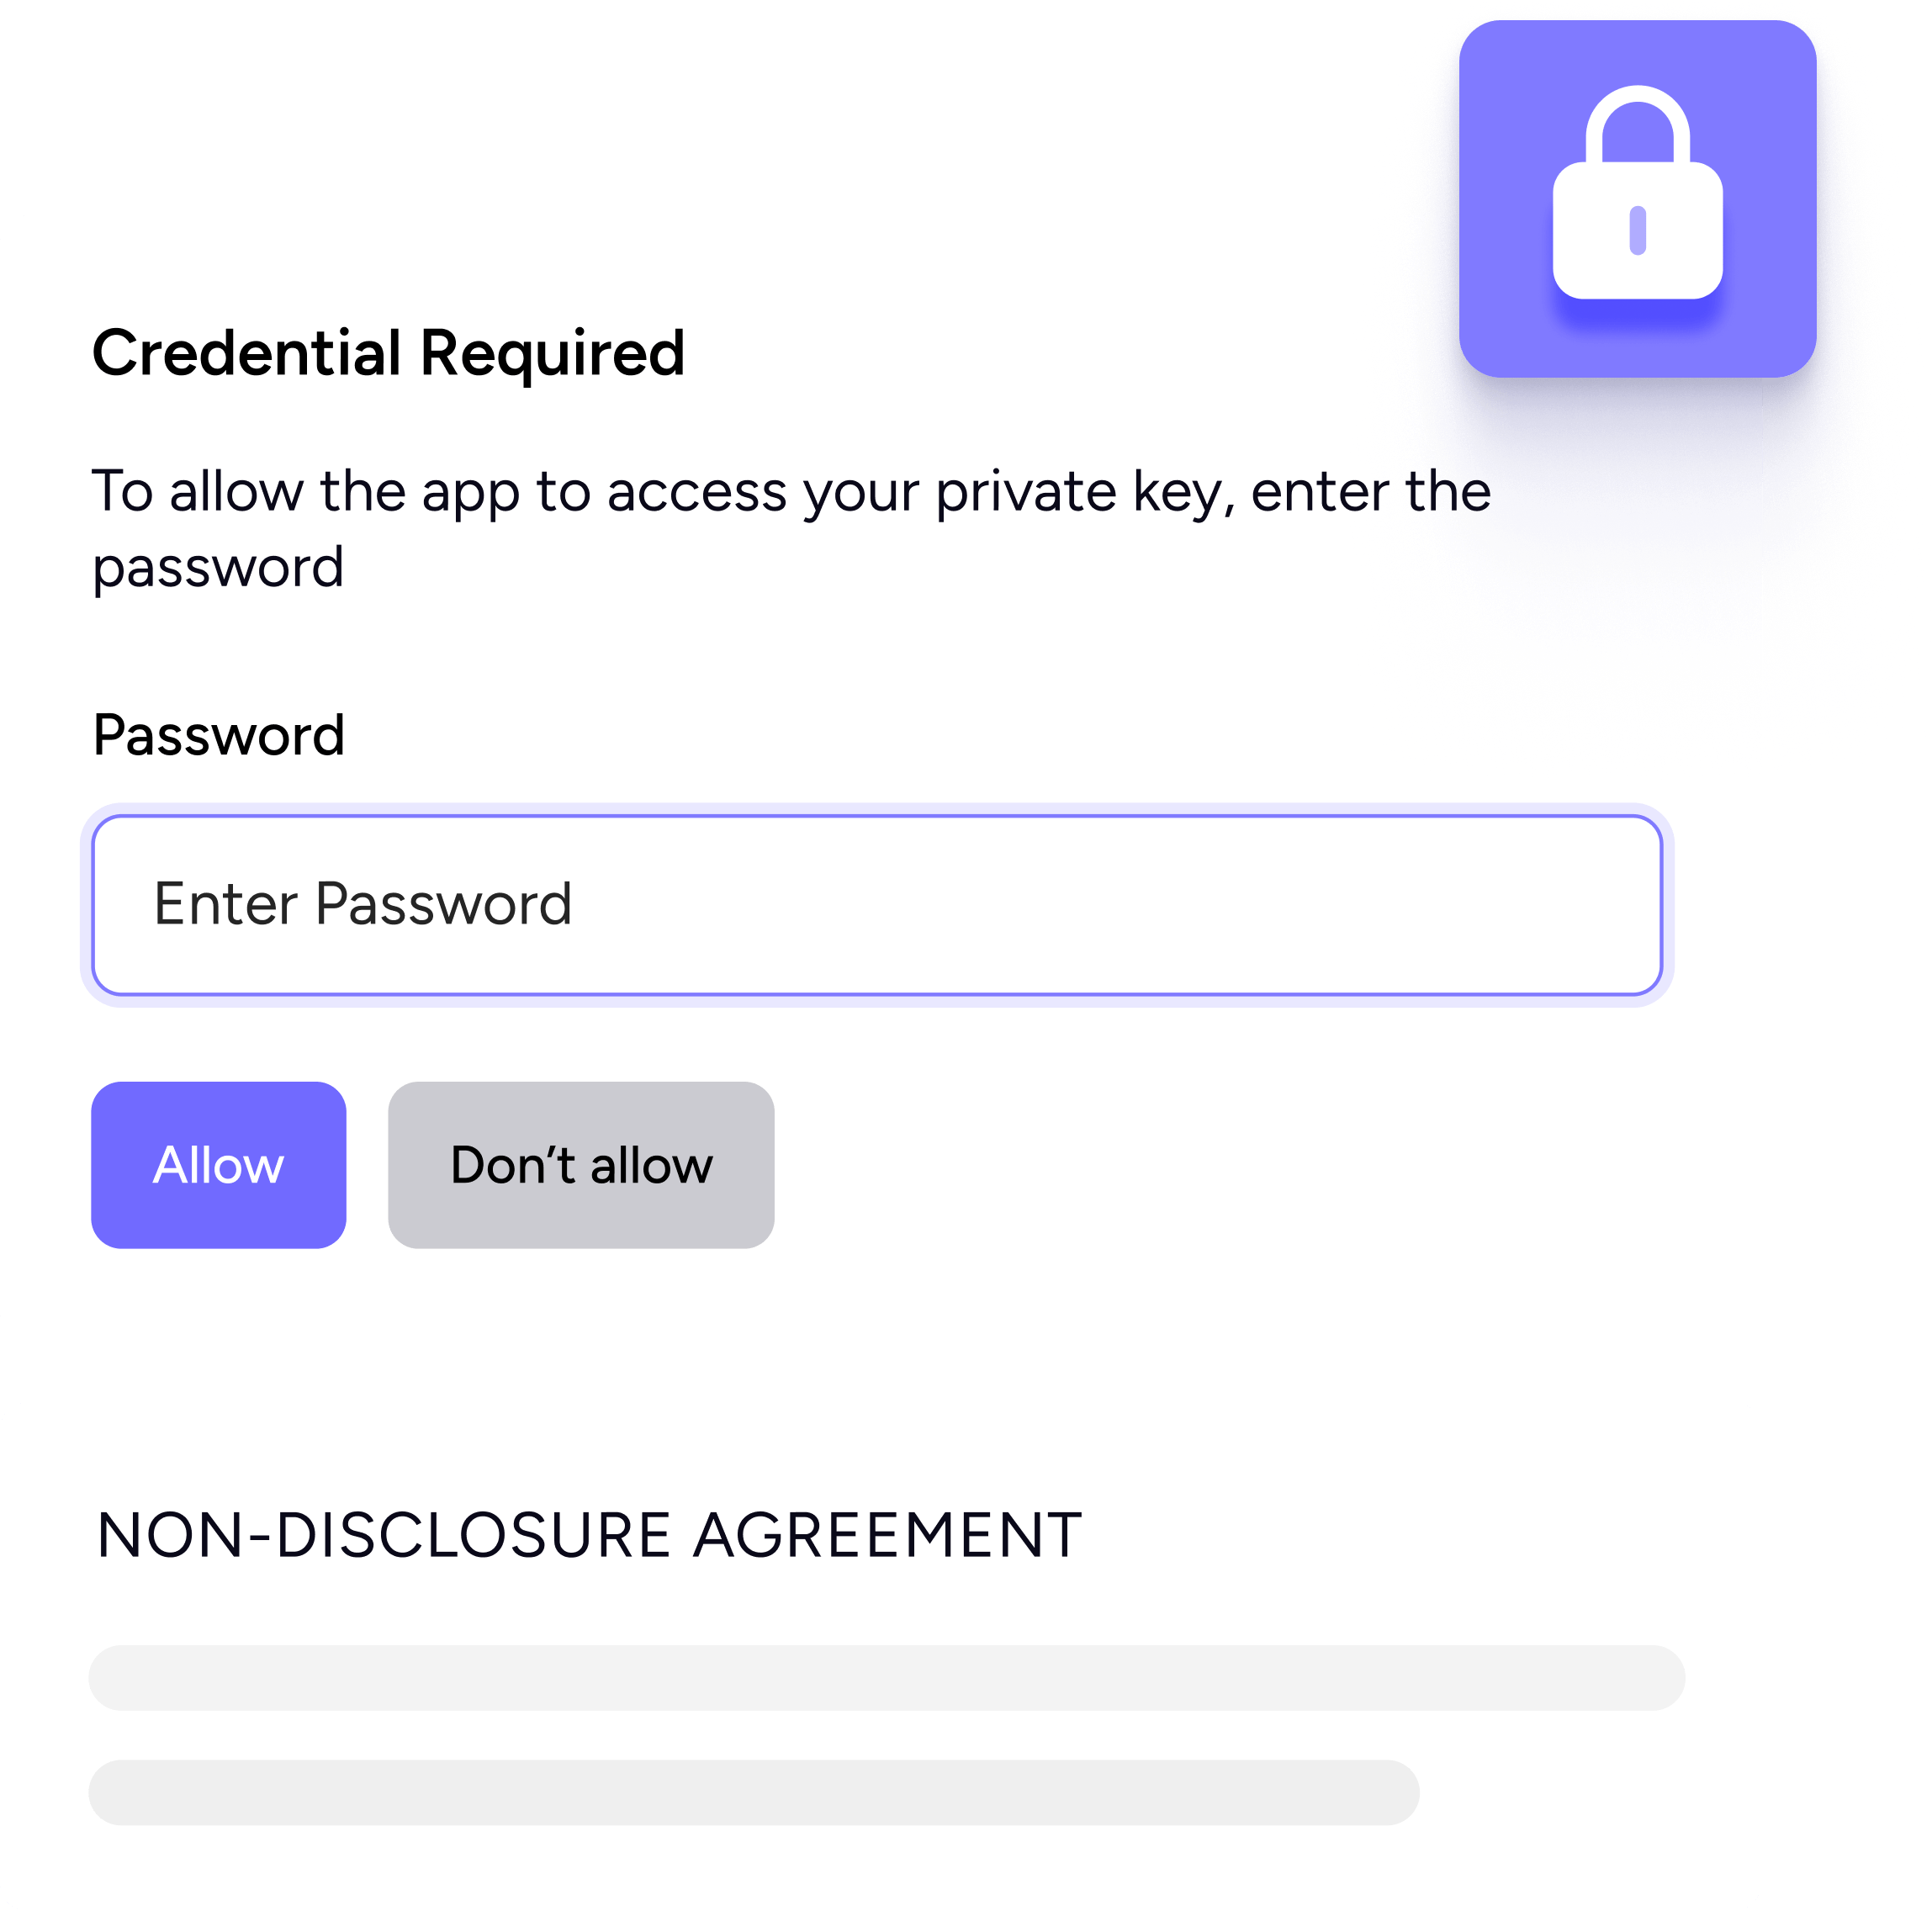 Credential required to proceed